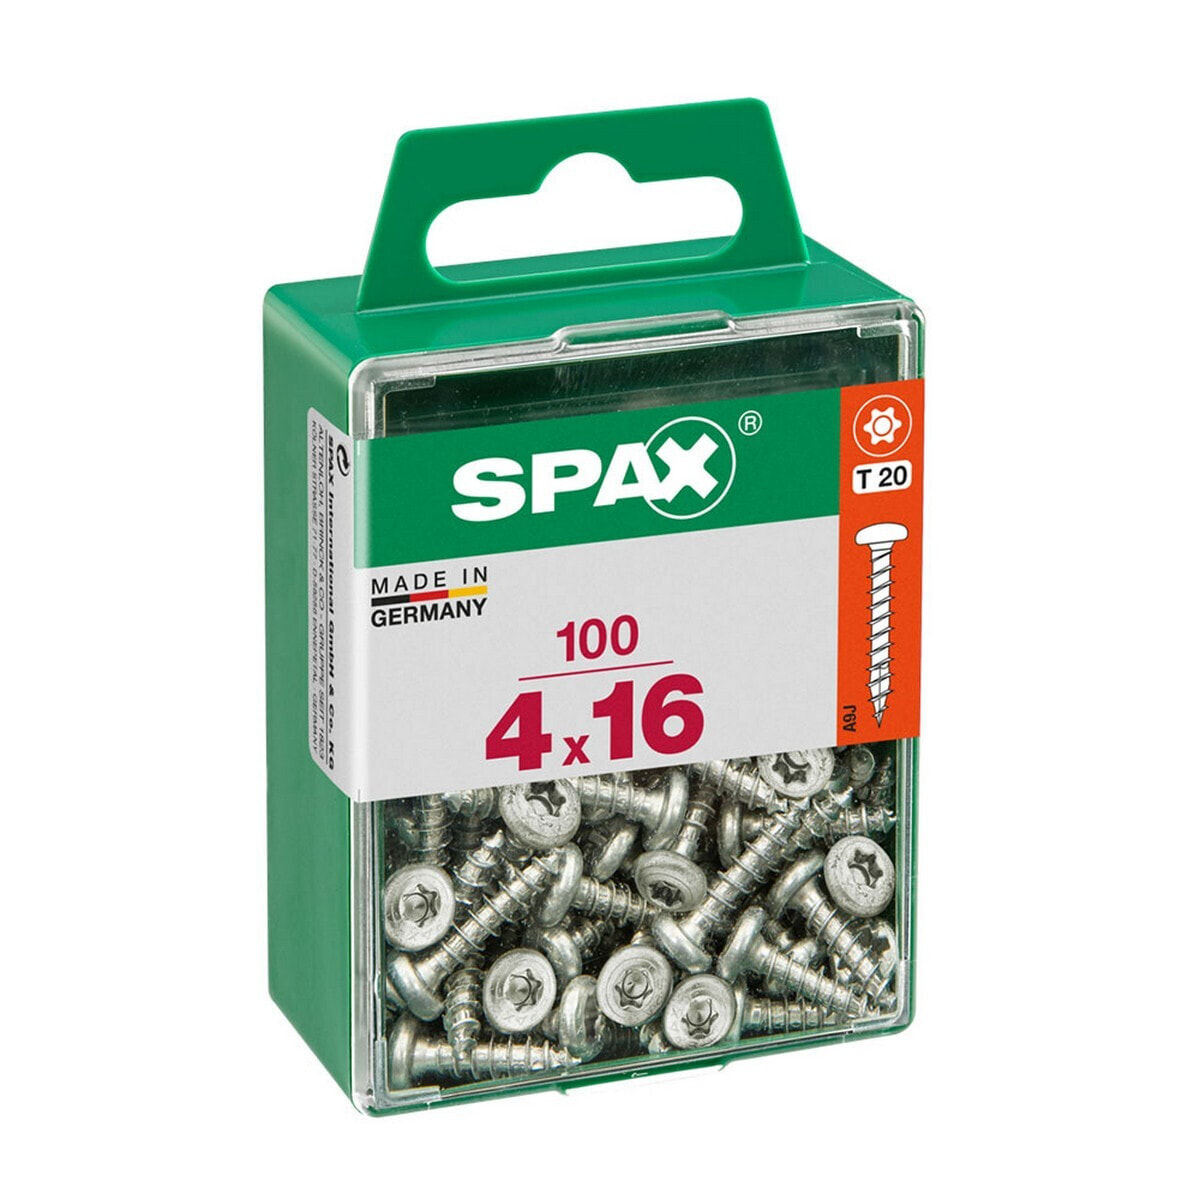 Box of screws SPAX Wirox Wood Round headed nozzle 100 Pieces (4 x 16 mm)